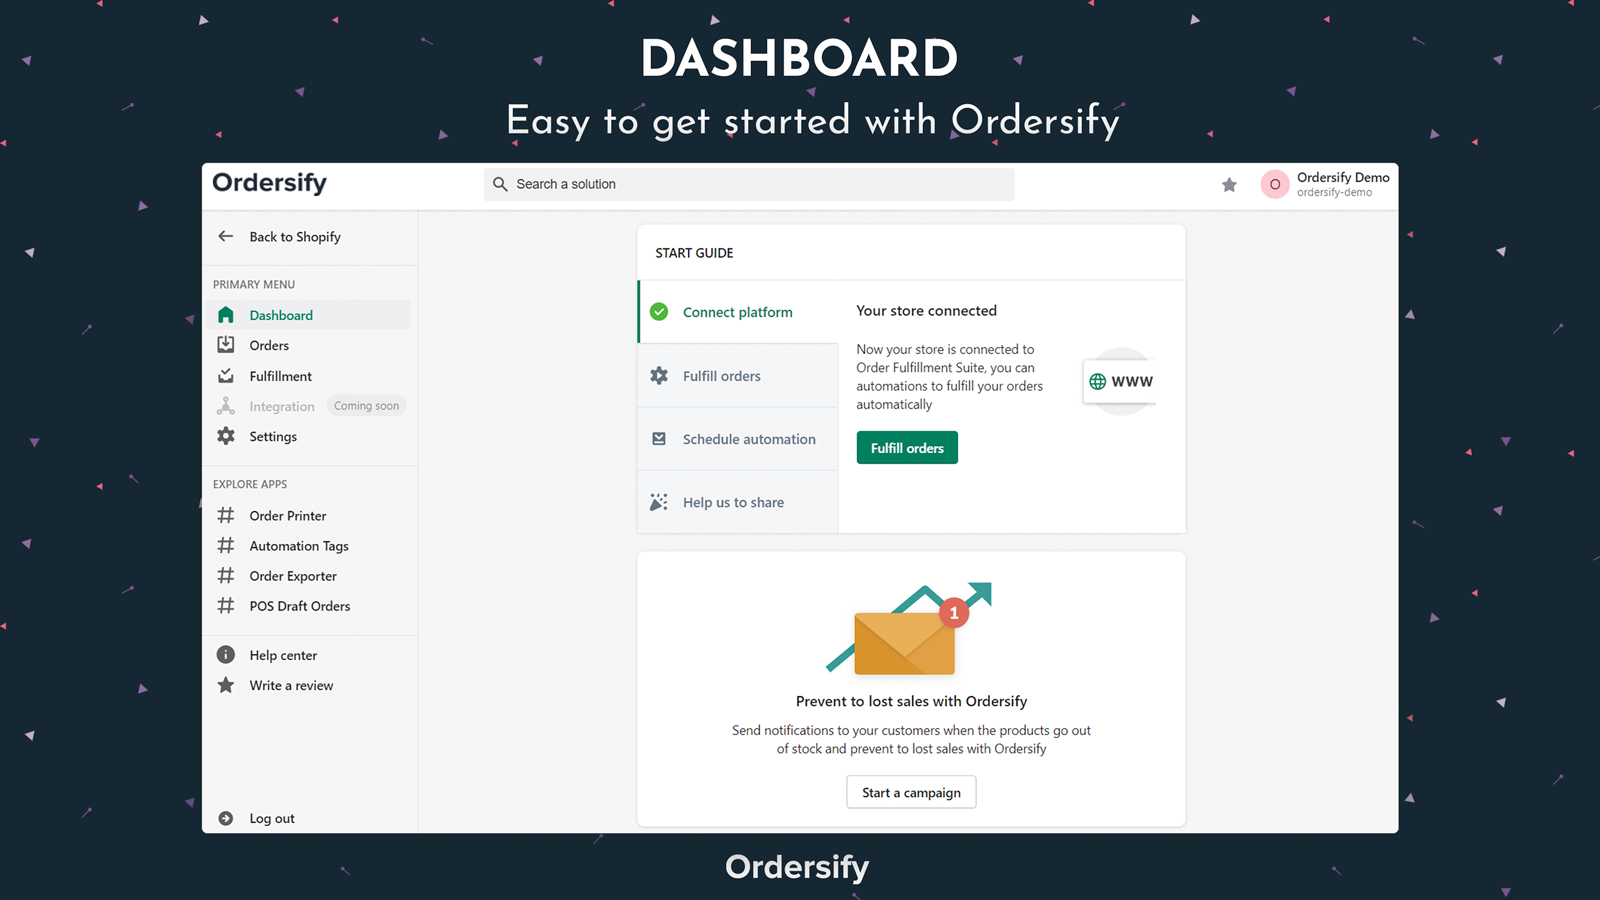 Dashboard - Easy to get started with Ordersify